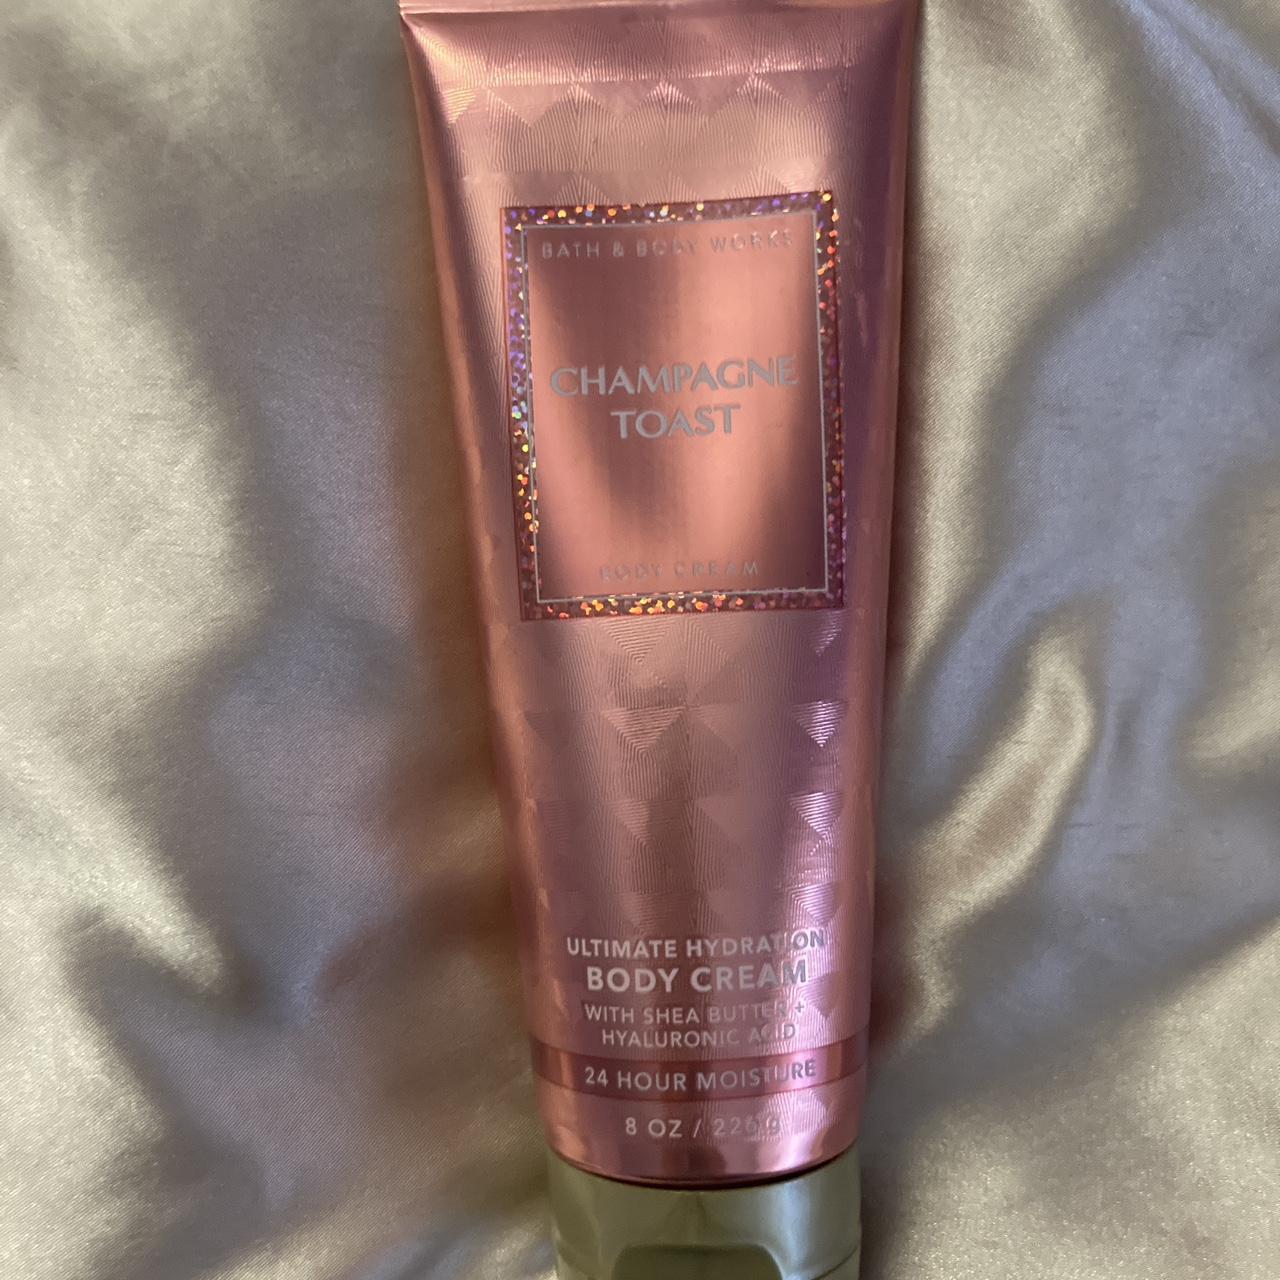 Bath & Body Works Champagne Toast Ultimate Hydration Body Cream with Hyaluronic Acid 8oz